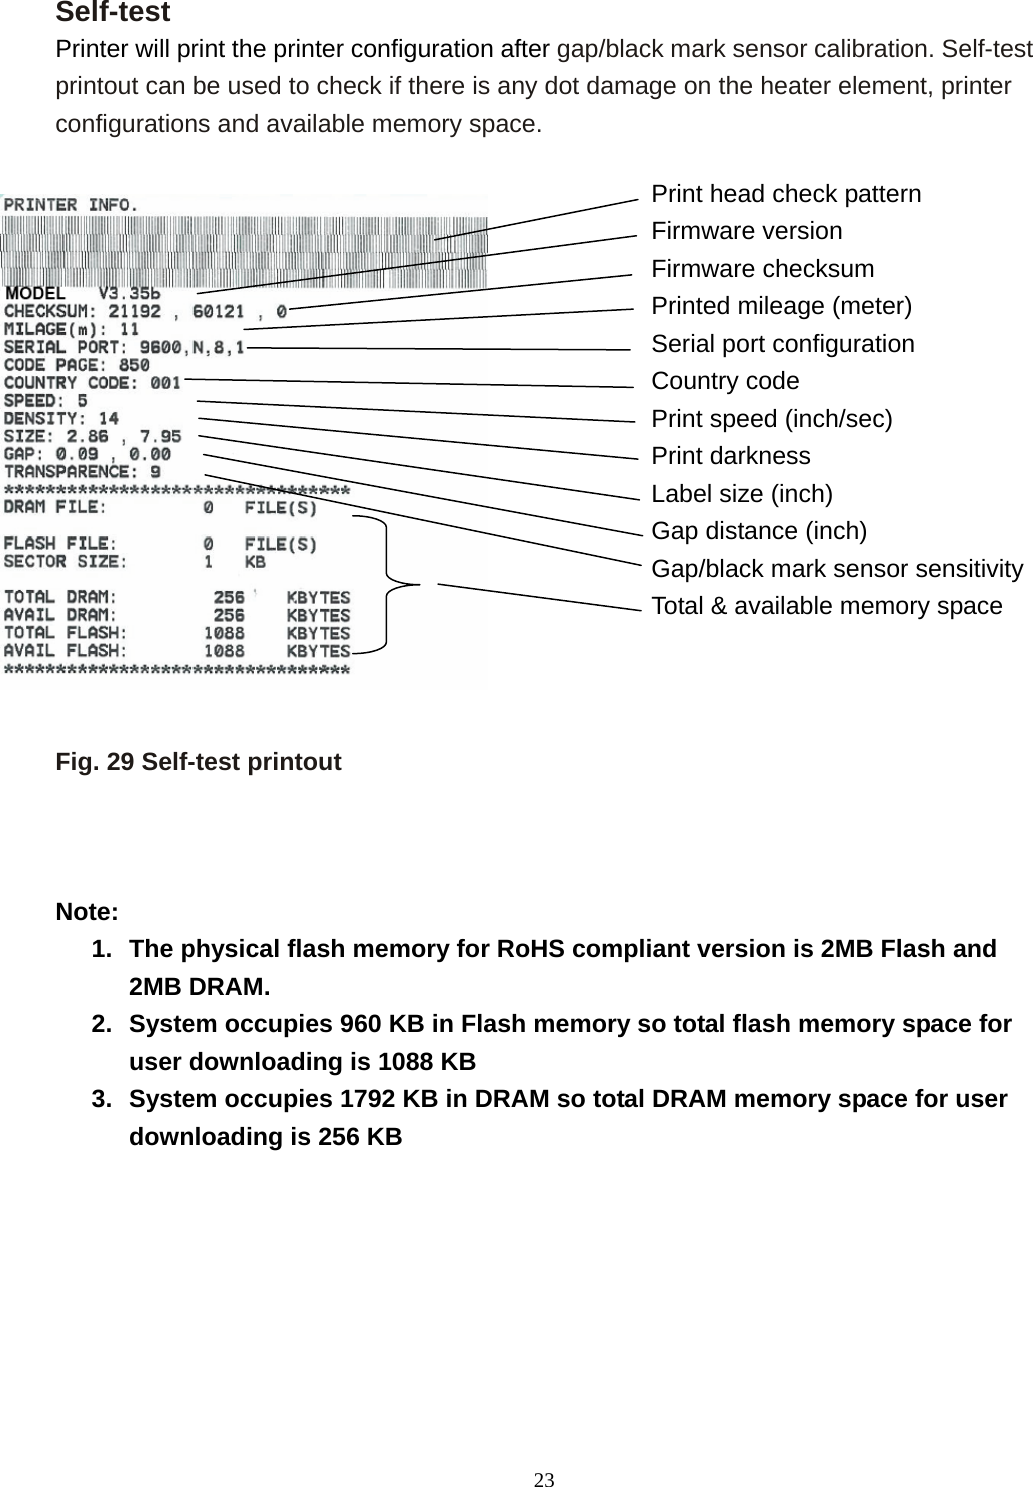  23Self-test Printer will print the printer configuration after gap/black mark sensor calibration. Self-test printout can be used to check if there is any dot damage on the heater element, printer configurations and available memory space.                 Fig. 29 Self-test printout    Note: 1.  The physical flash memory for RoHS compliant version is 2MB Flash and 2MB DRAM. 2.  System occupies 960 KB in Flash memory so total flash memory space for user downloading is 1088 KB 3.  System occupies 1792 KB in DRAM so total DRAM memory space for user downloading is 256 KB         Print head check pattern Firmware version   Firmware checksum Printed mileage (meter) Serial port configuration Country code Print speed (inch/sec) Print darkness Label size (inch) Gap distance (inch) Gap/black mark sensor sensitivity Total &amp; available memory space  